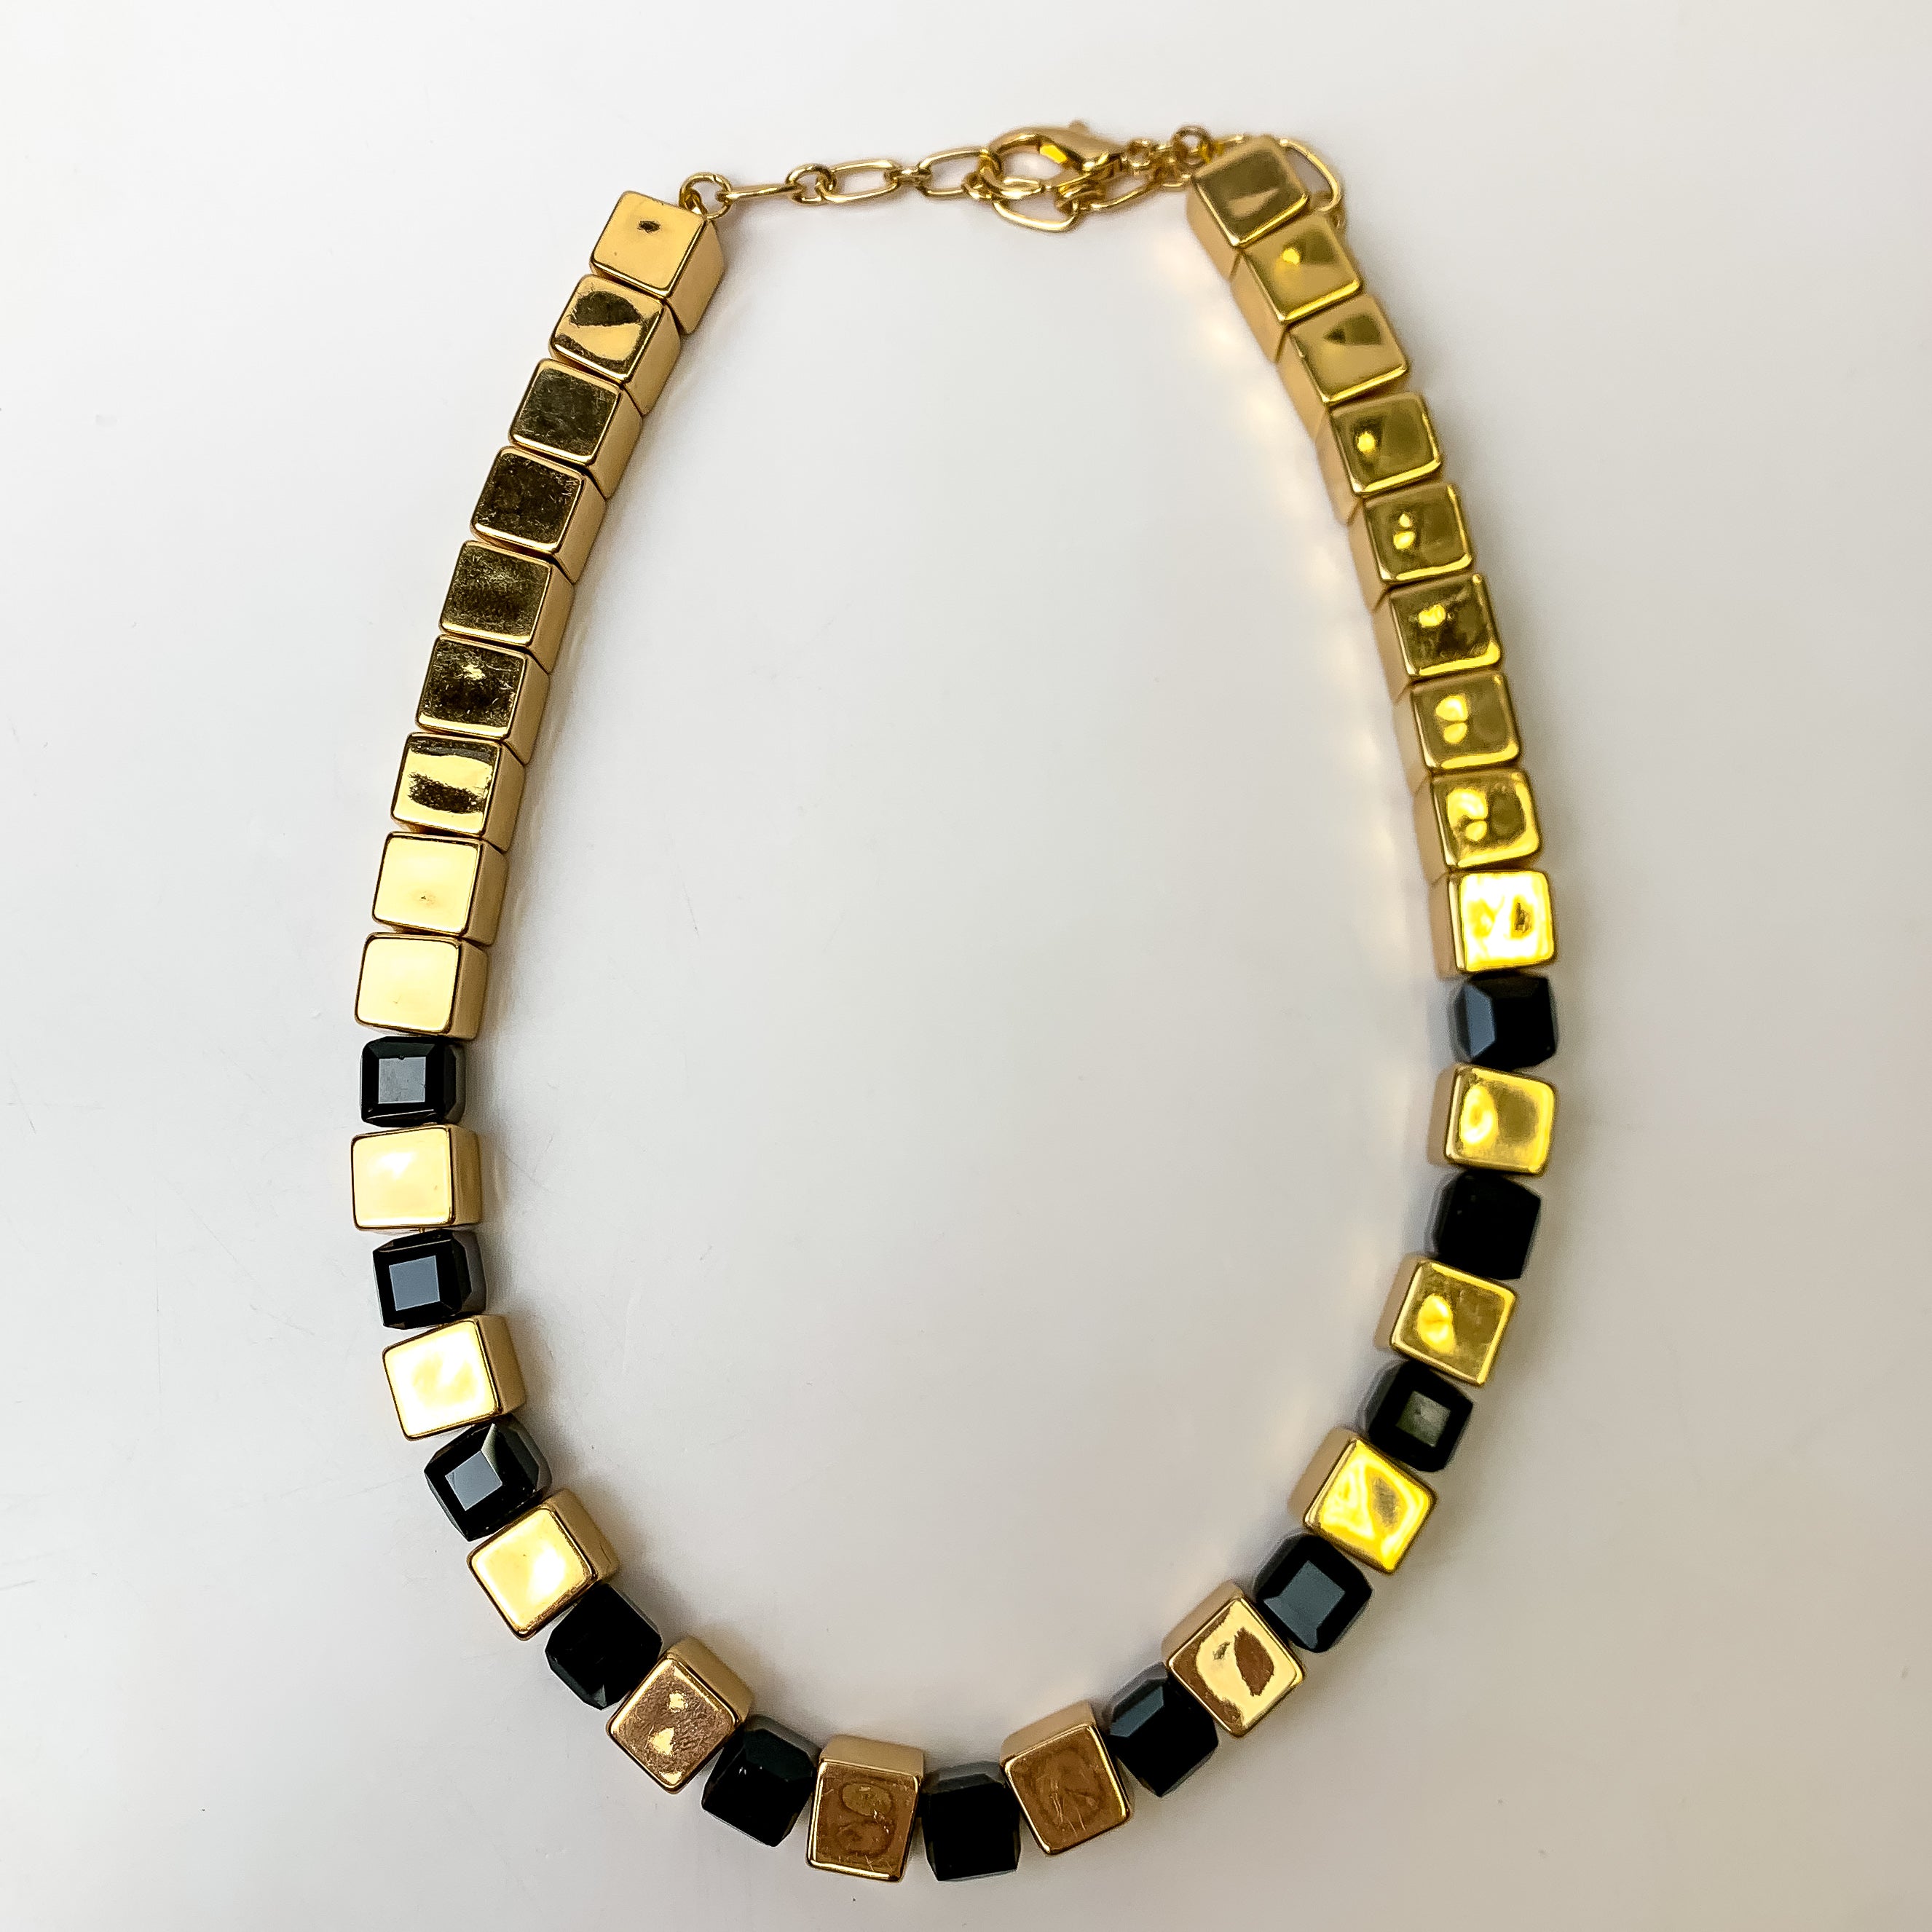 This Fashionably Late Gold Toned Cubed Necklace in Black is pictured on a white background.